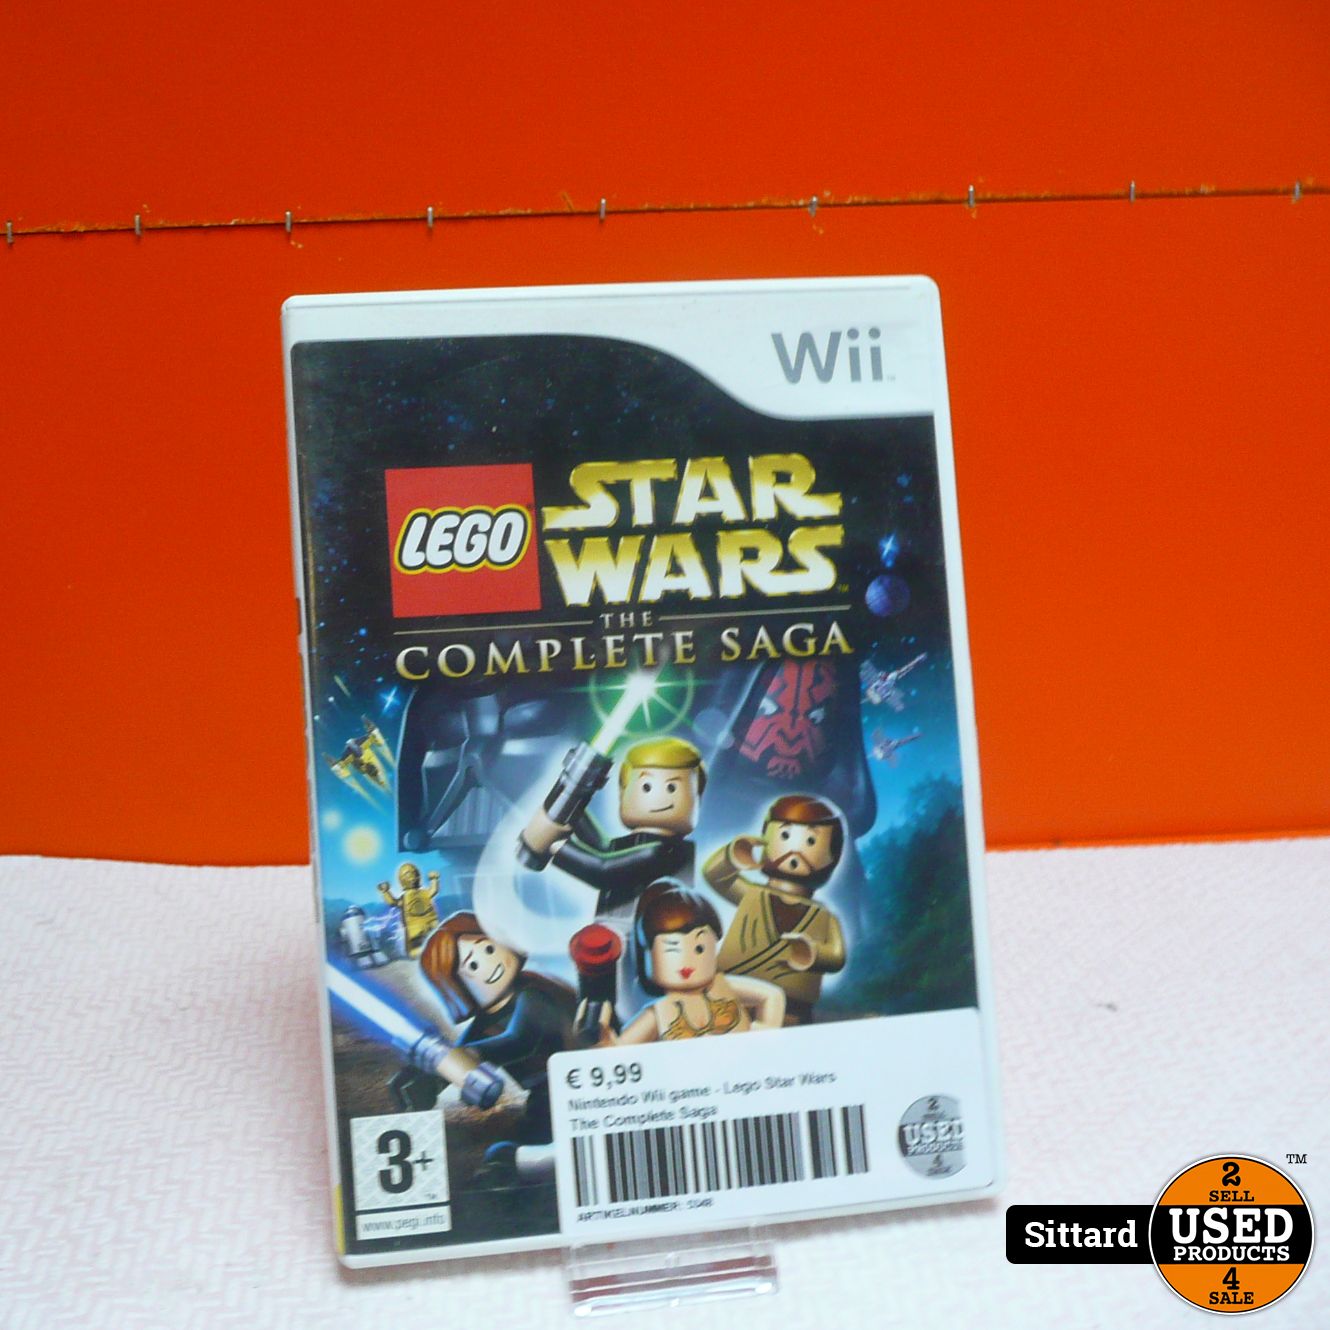 Nintendo Wii game - Lego Complete - Used Products Sittard